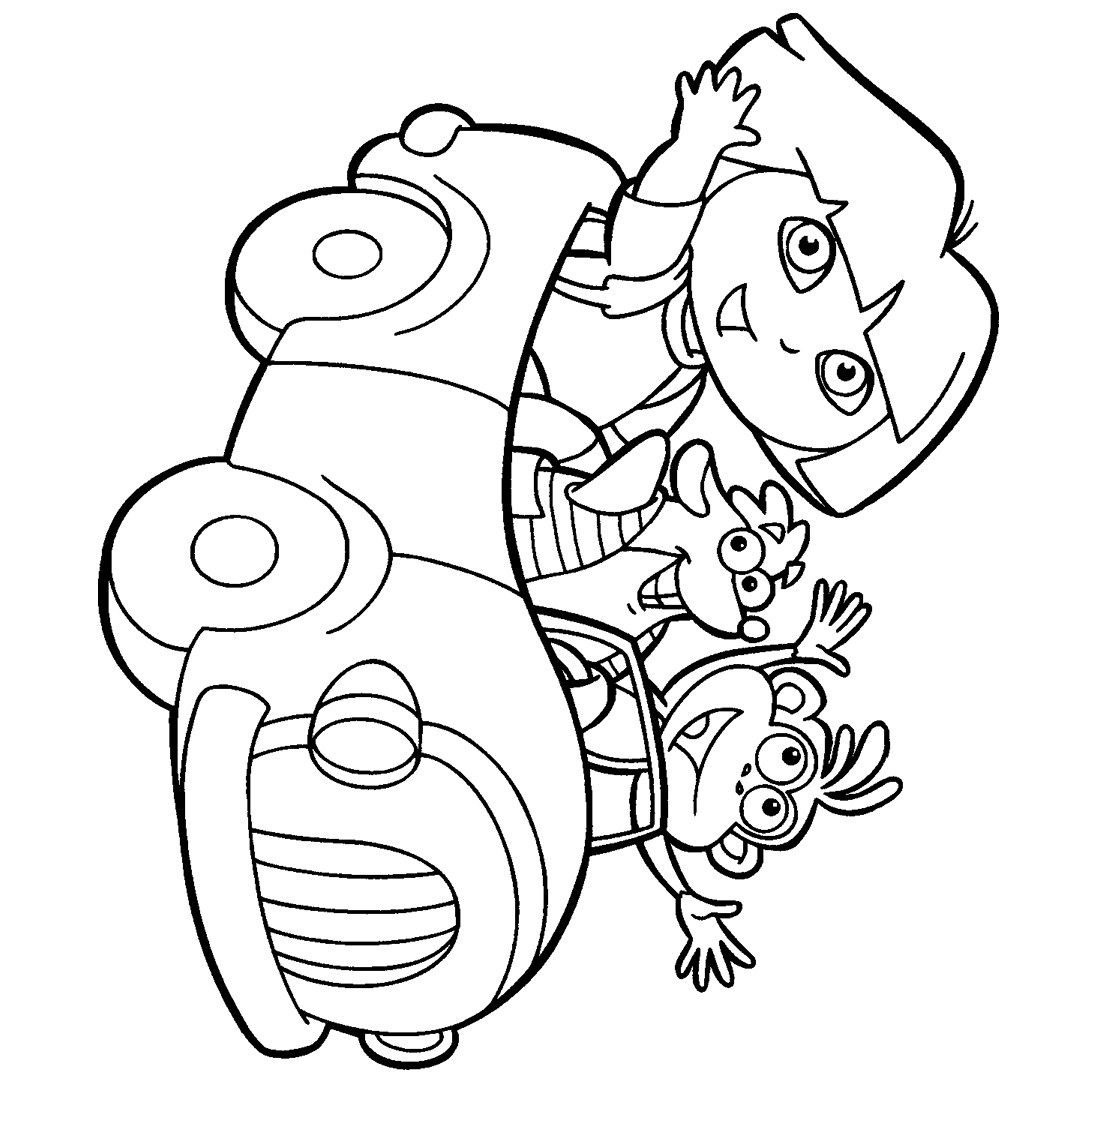 Coloring Sheet For Kids
 Printable coloring pages for kids